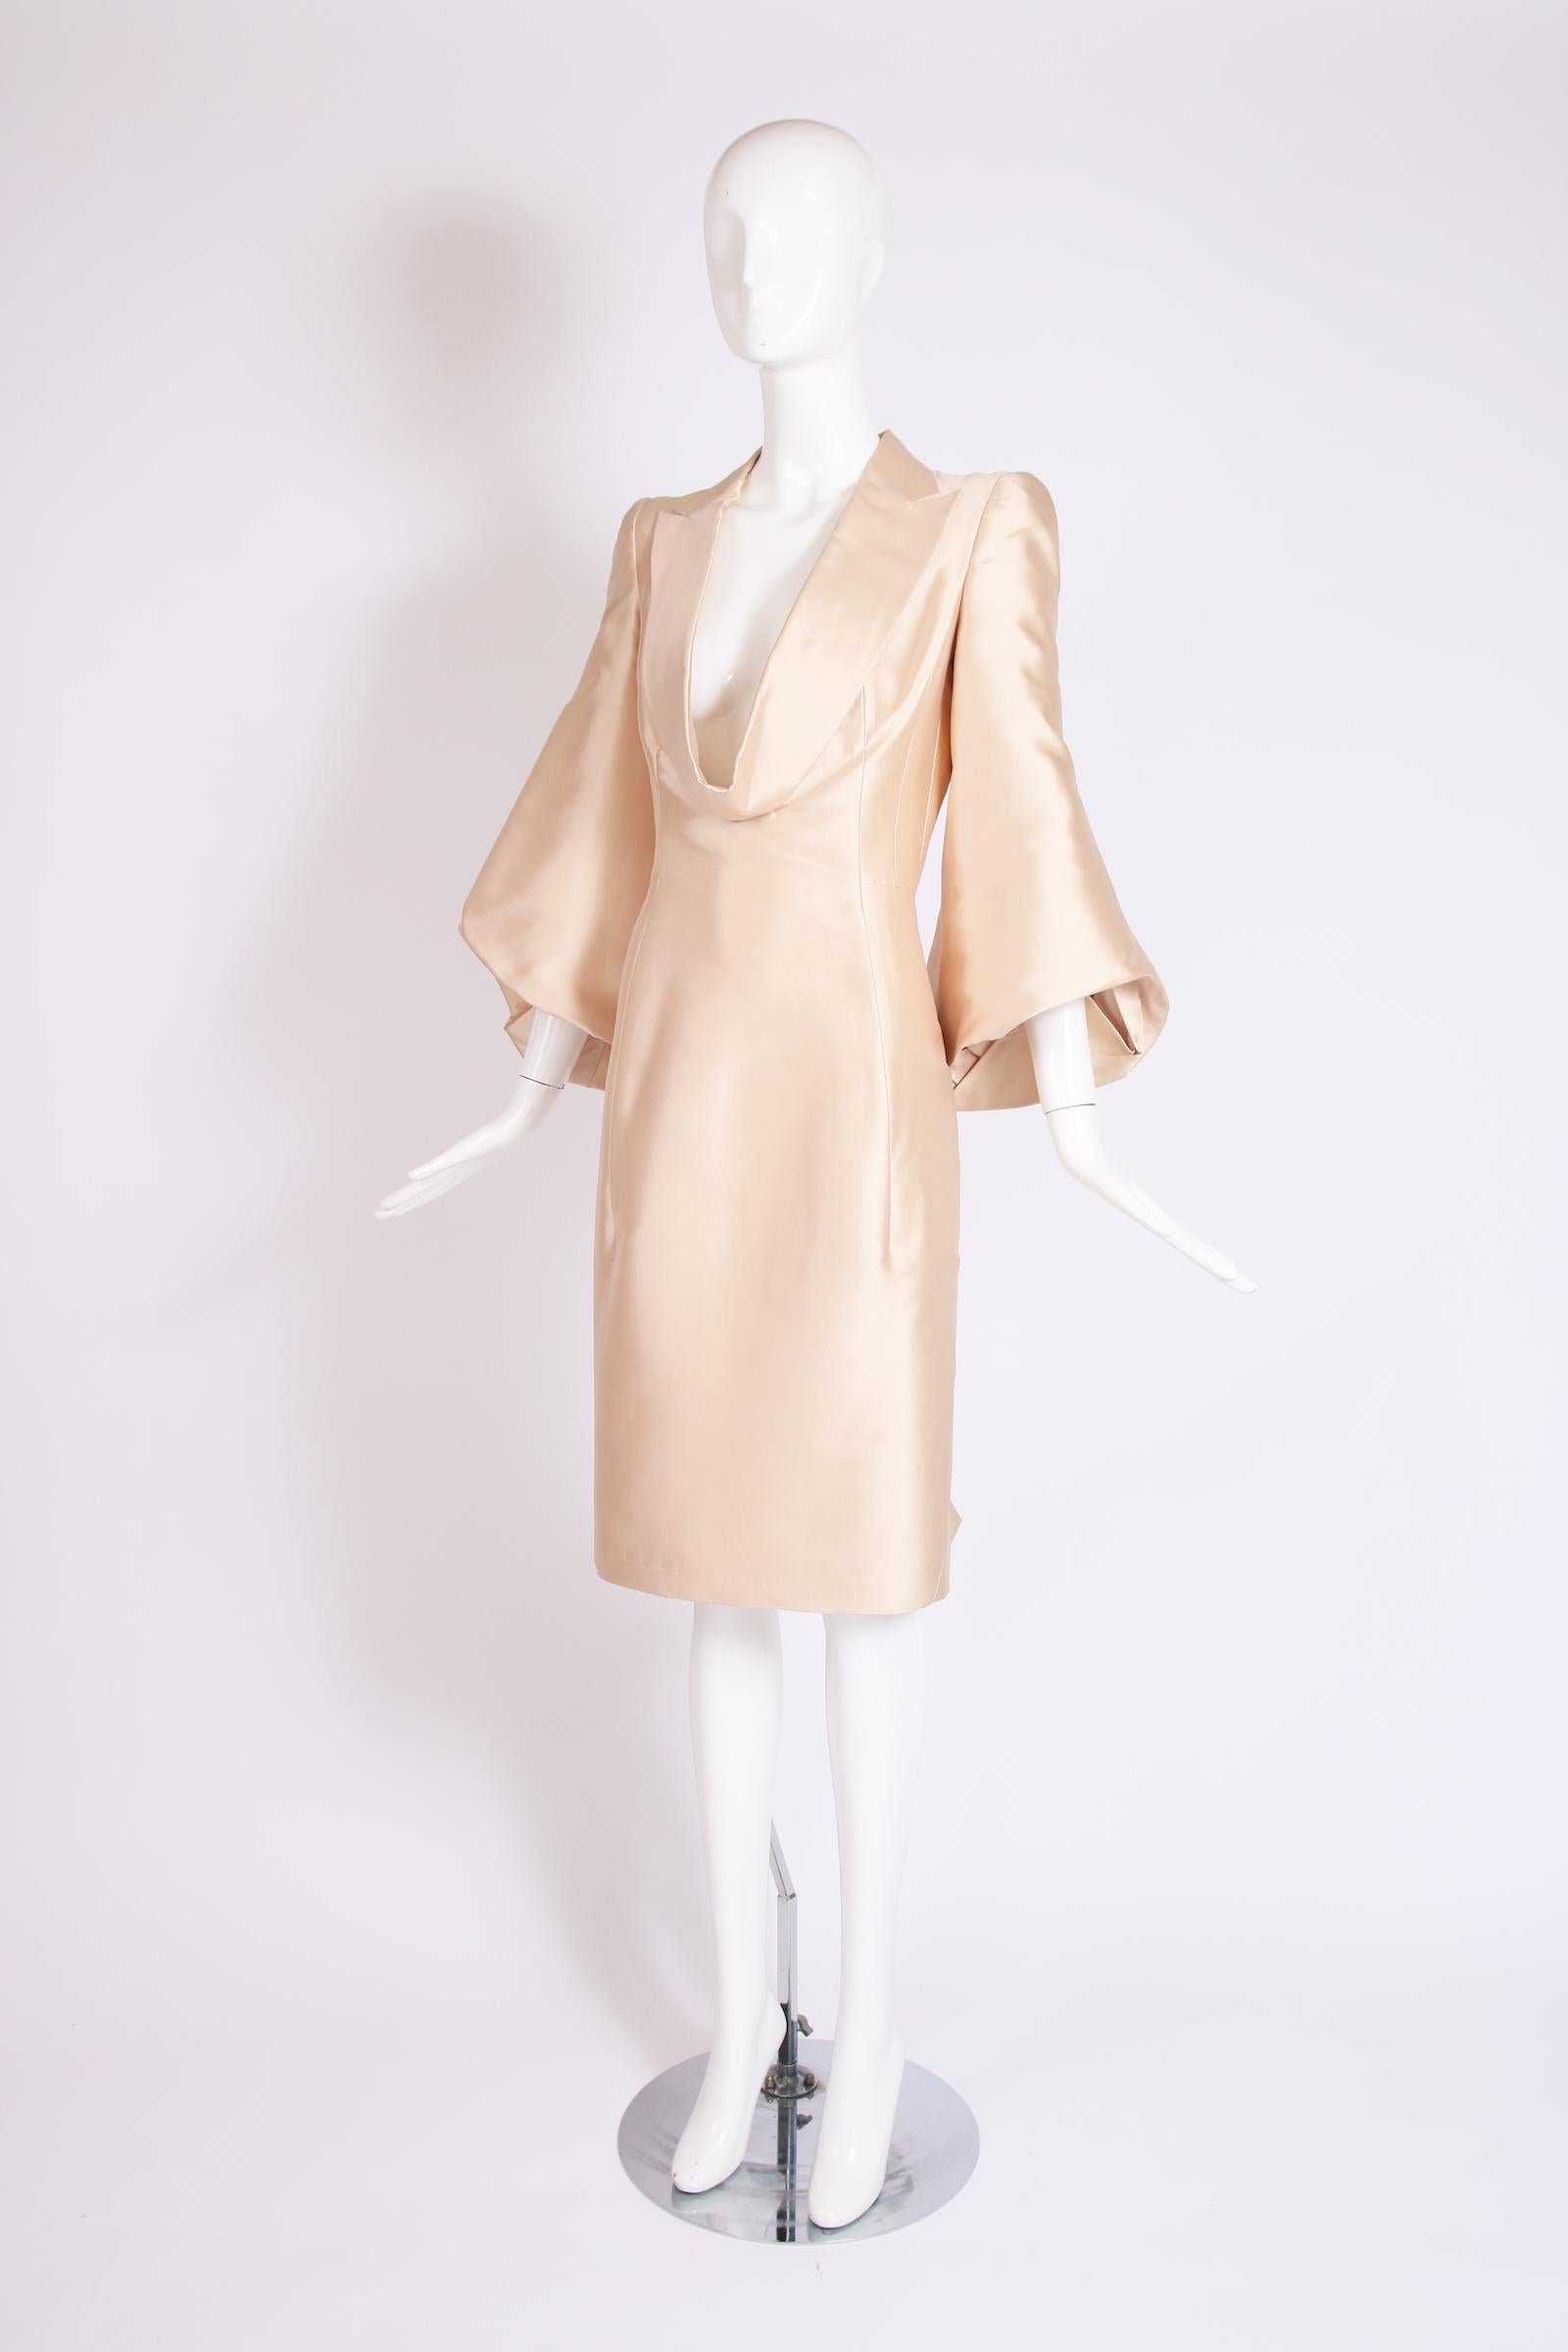 1990's John Galliano creme silk plunge neckline cocktail dress w/dramatic sleeves. Lined at the interior with silk charmeuse. No size or fabric tag so please consult measurements. In excellent condition.

Bust: 32